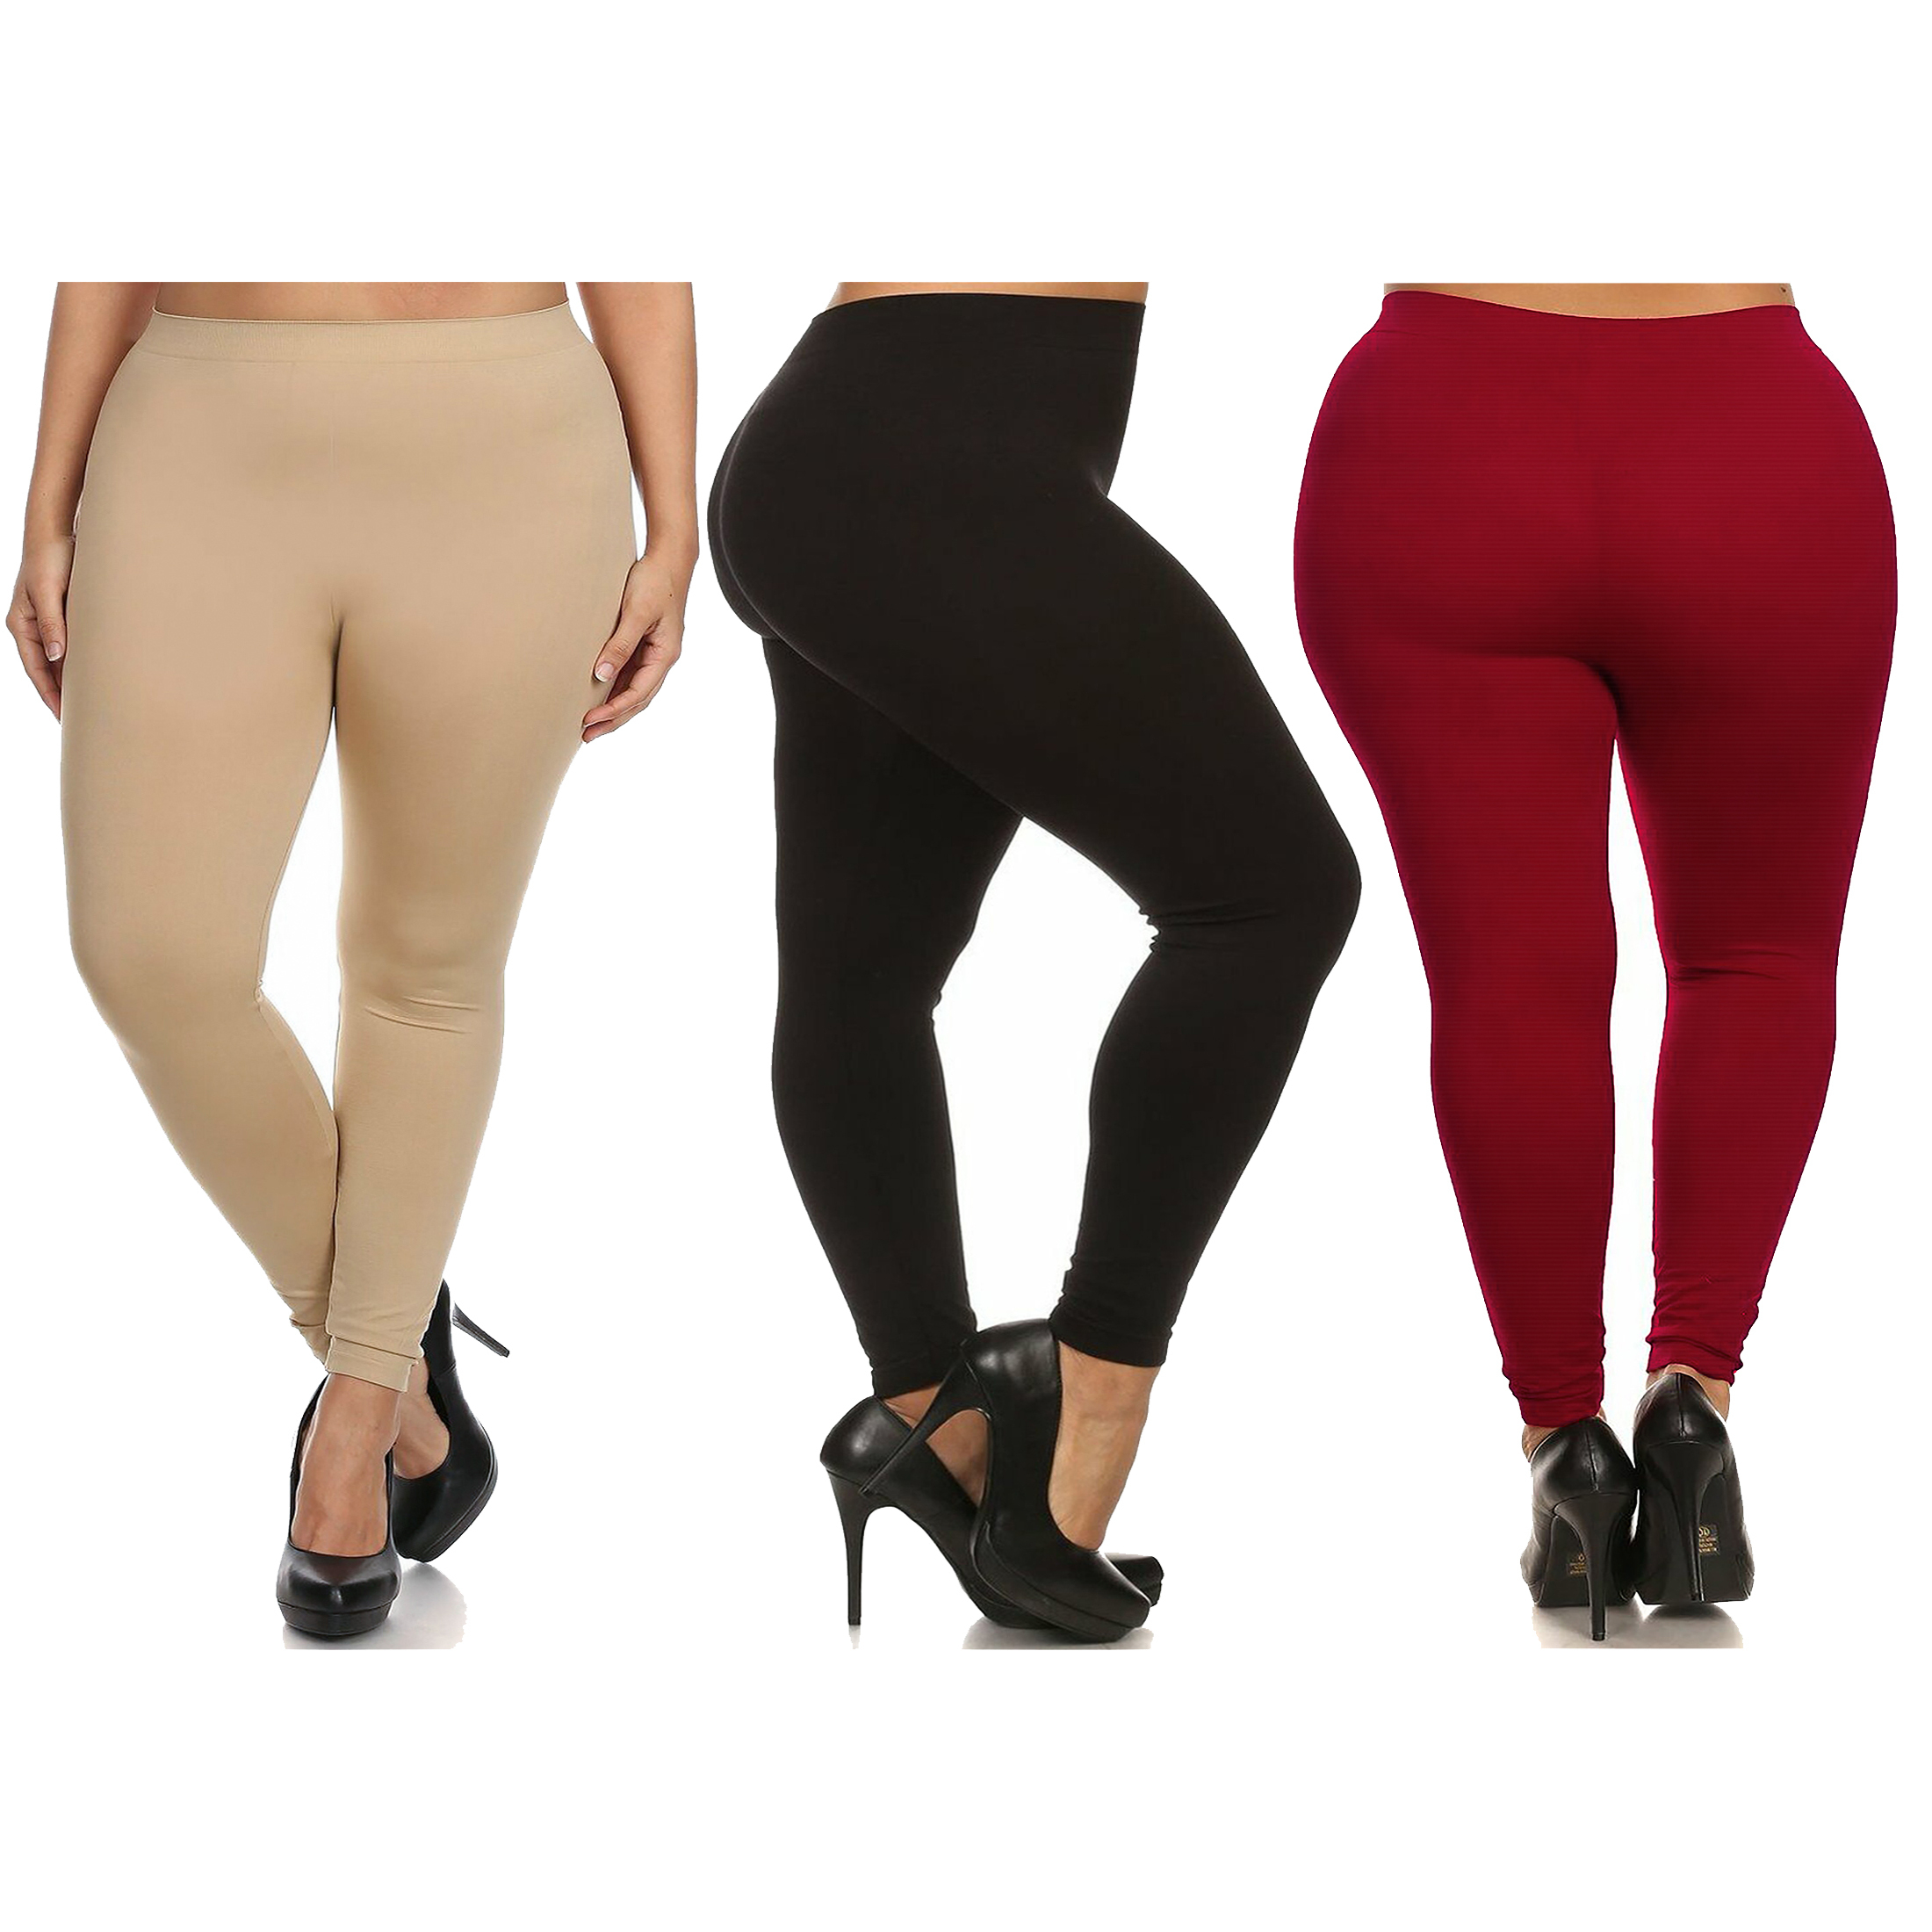 Multi-Pack: Plus Size Women's Casual Ultra-Soft Workout Yoga Leggings - 1 Pack